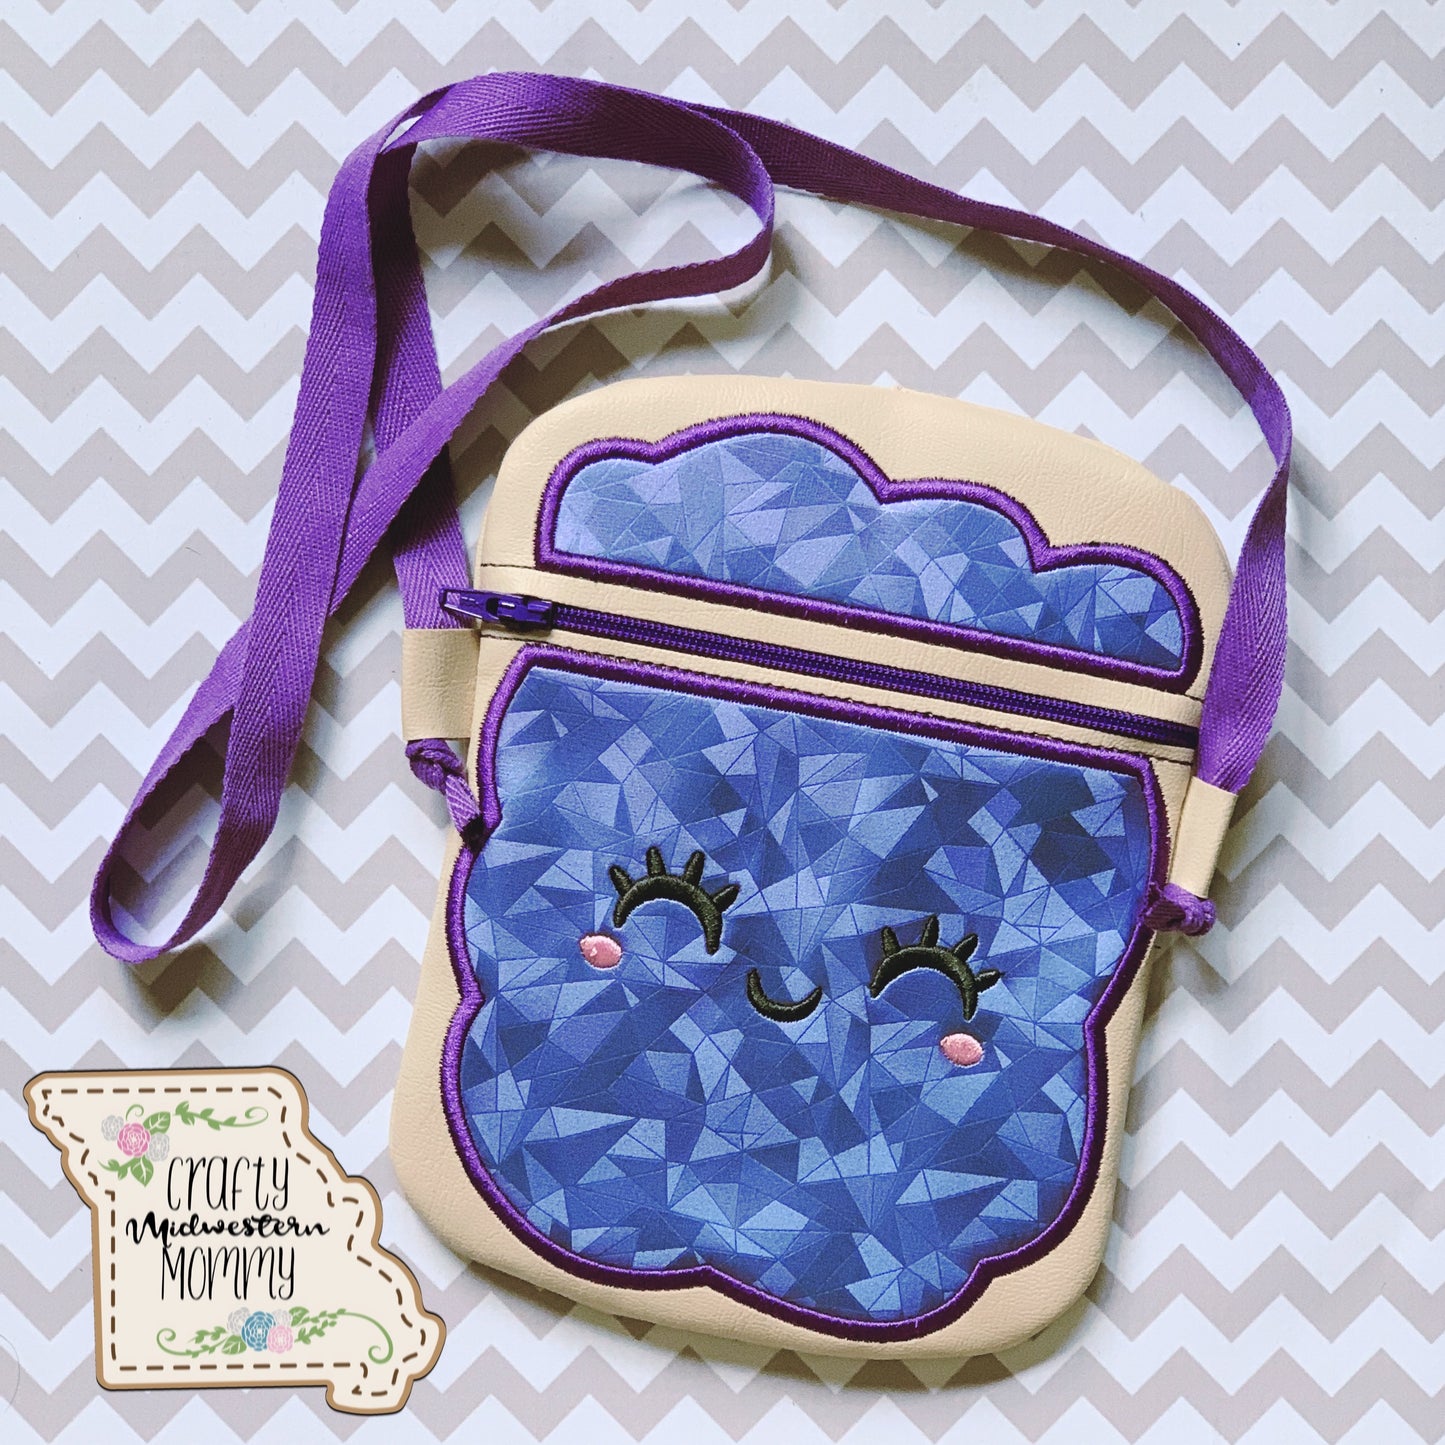 Peanut Butter and Jelly Purse